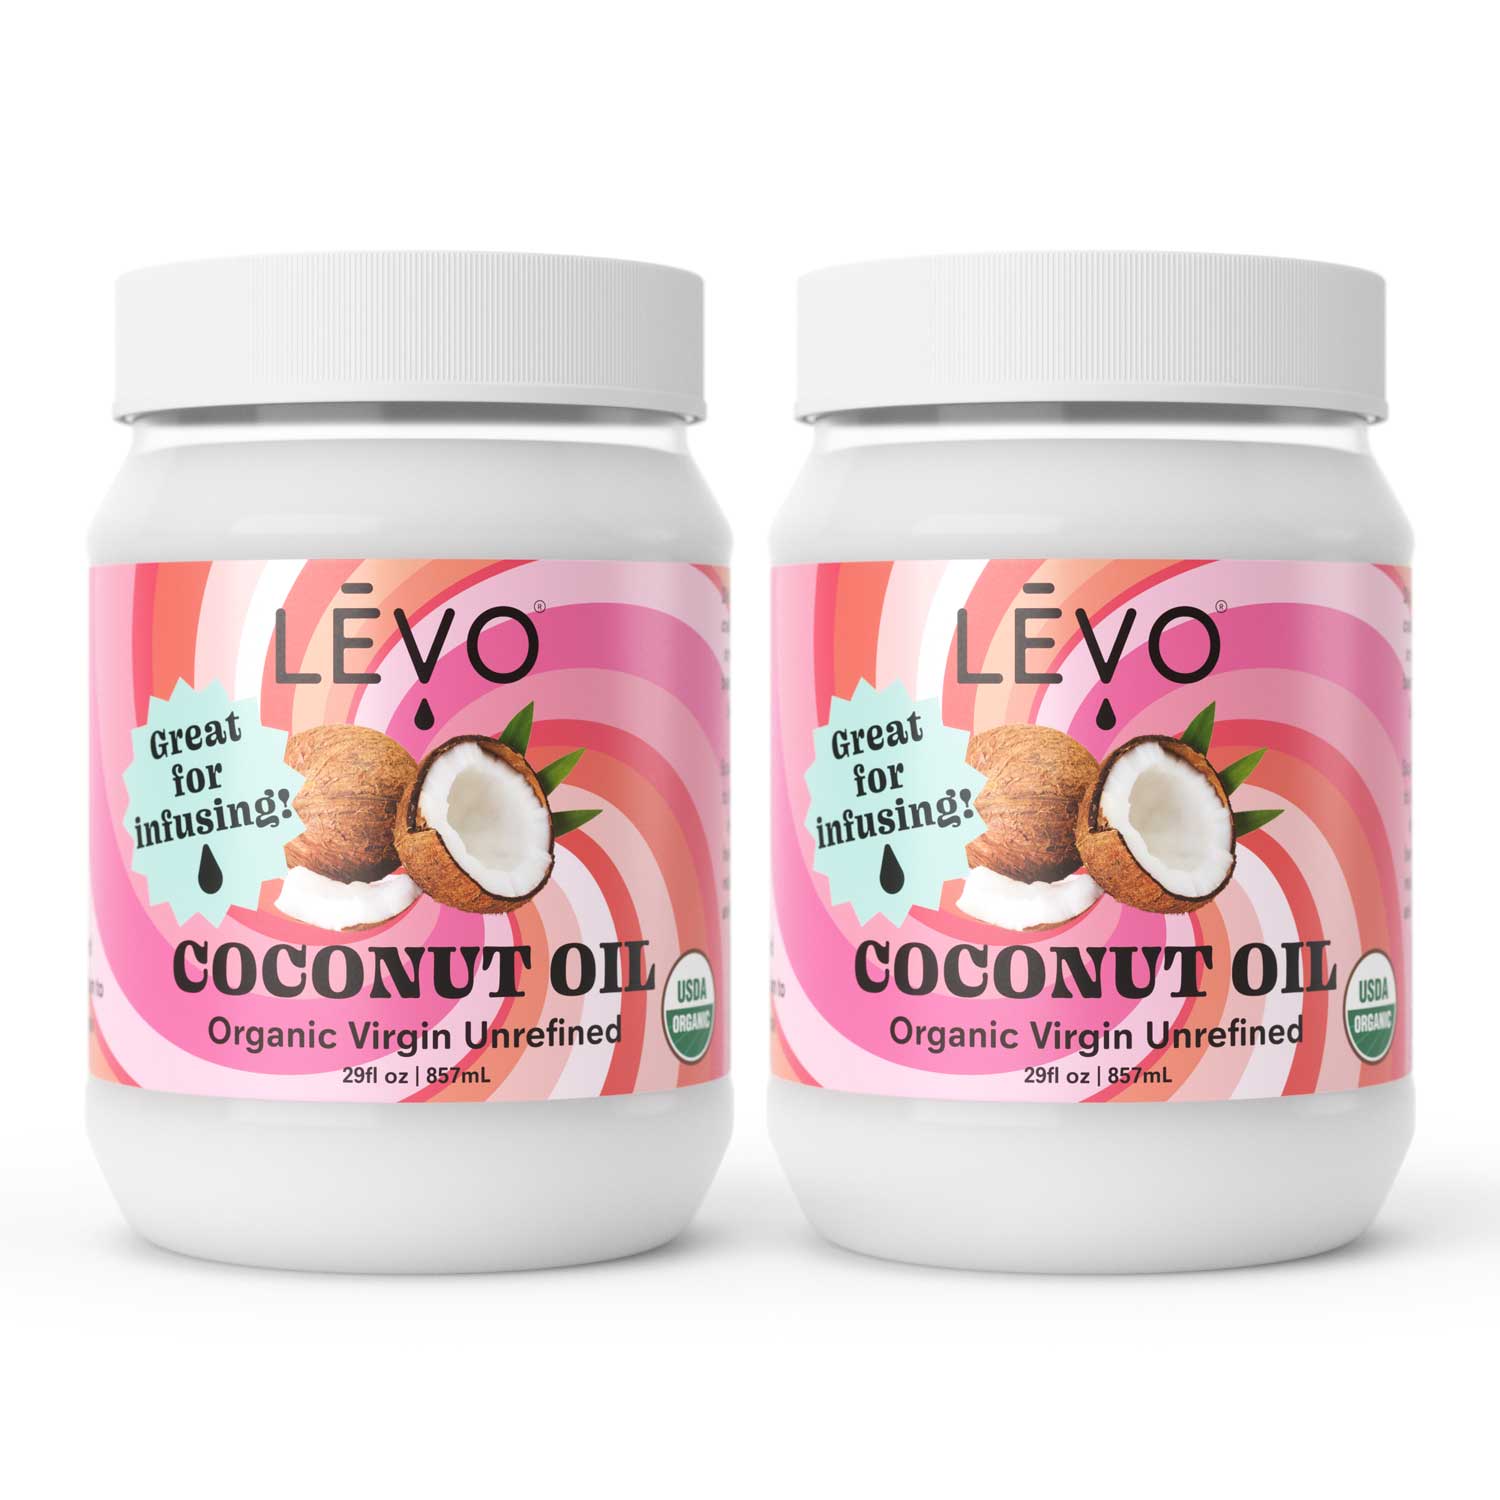 LEVO Coconut Oil is Organic, virgin, and unrefined. It's great for infusing and has a nice coconut taste. Certified Organic for all your healthy infusions with LEVO II. The 29 oz jar will fill almost 2 reservoirs full. LĒVO Organic Virgin Unrefined Coconut Oil: A versatile and healthy alternative to butter or olive oil.